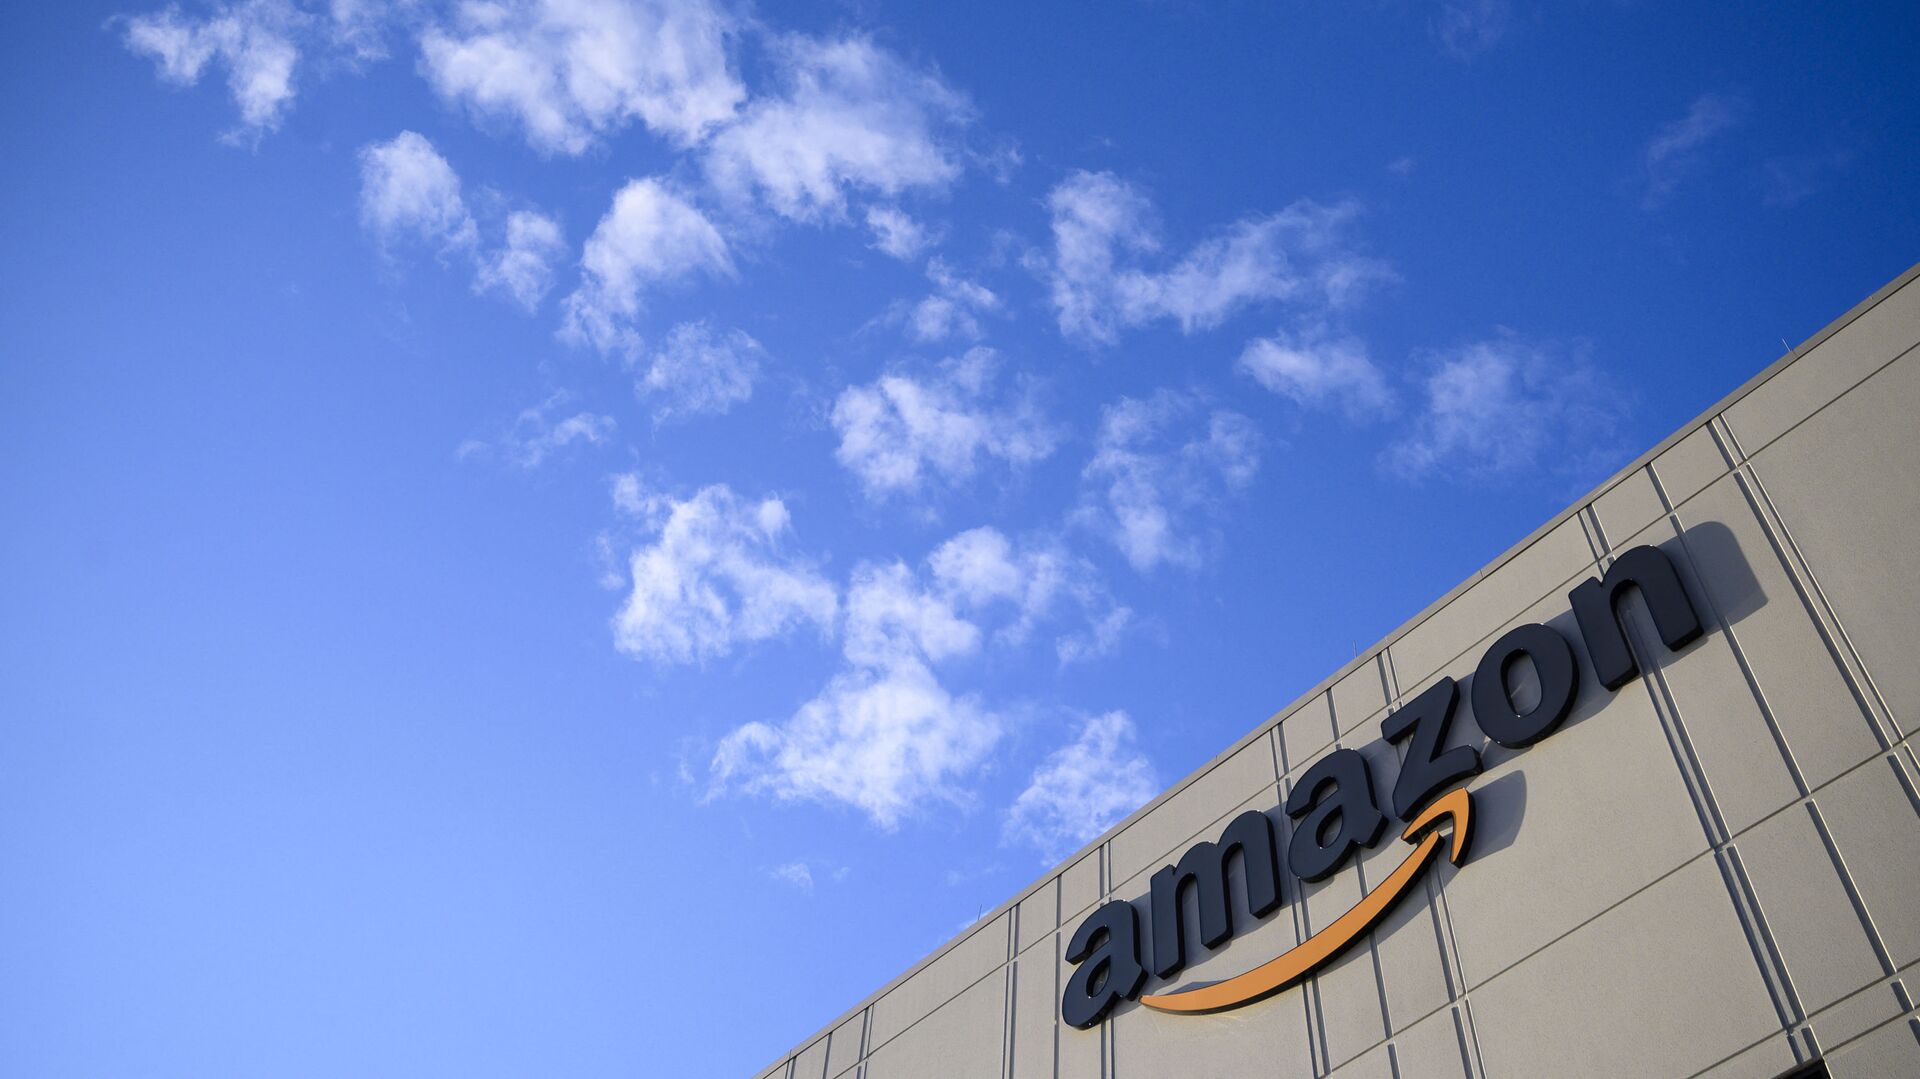  In this file photo taken on April 5, 2021, the Amazon logo at the 855,000-square-foot Amazon fulfillment center is seen in Staten Island, one of the five boroughs of New York City, on February 5, 2019. - Tech and e-commerce colossus Amazon on April 29, 2021 reported that its profit in the recently ended quarter tripled as online sales boomed. - Sputnik International, 1920, 08.11.2021